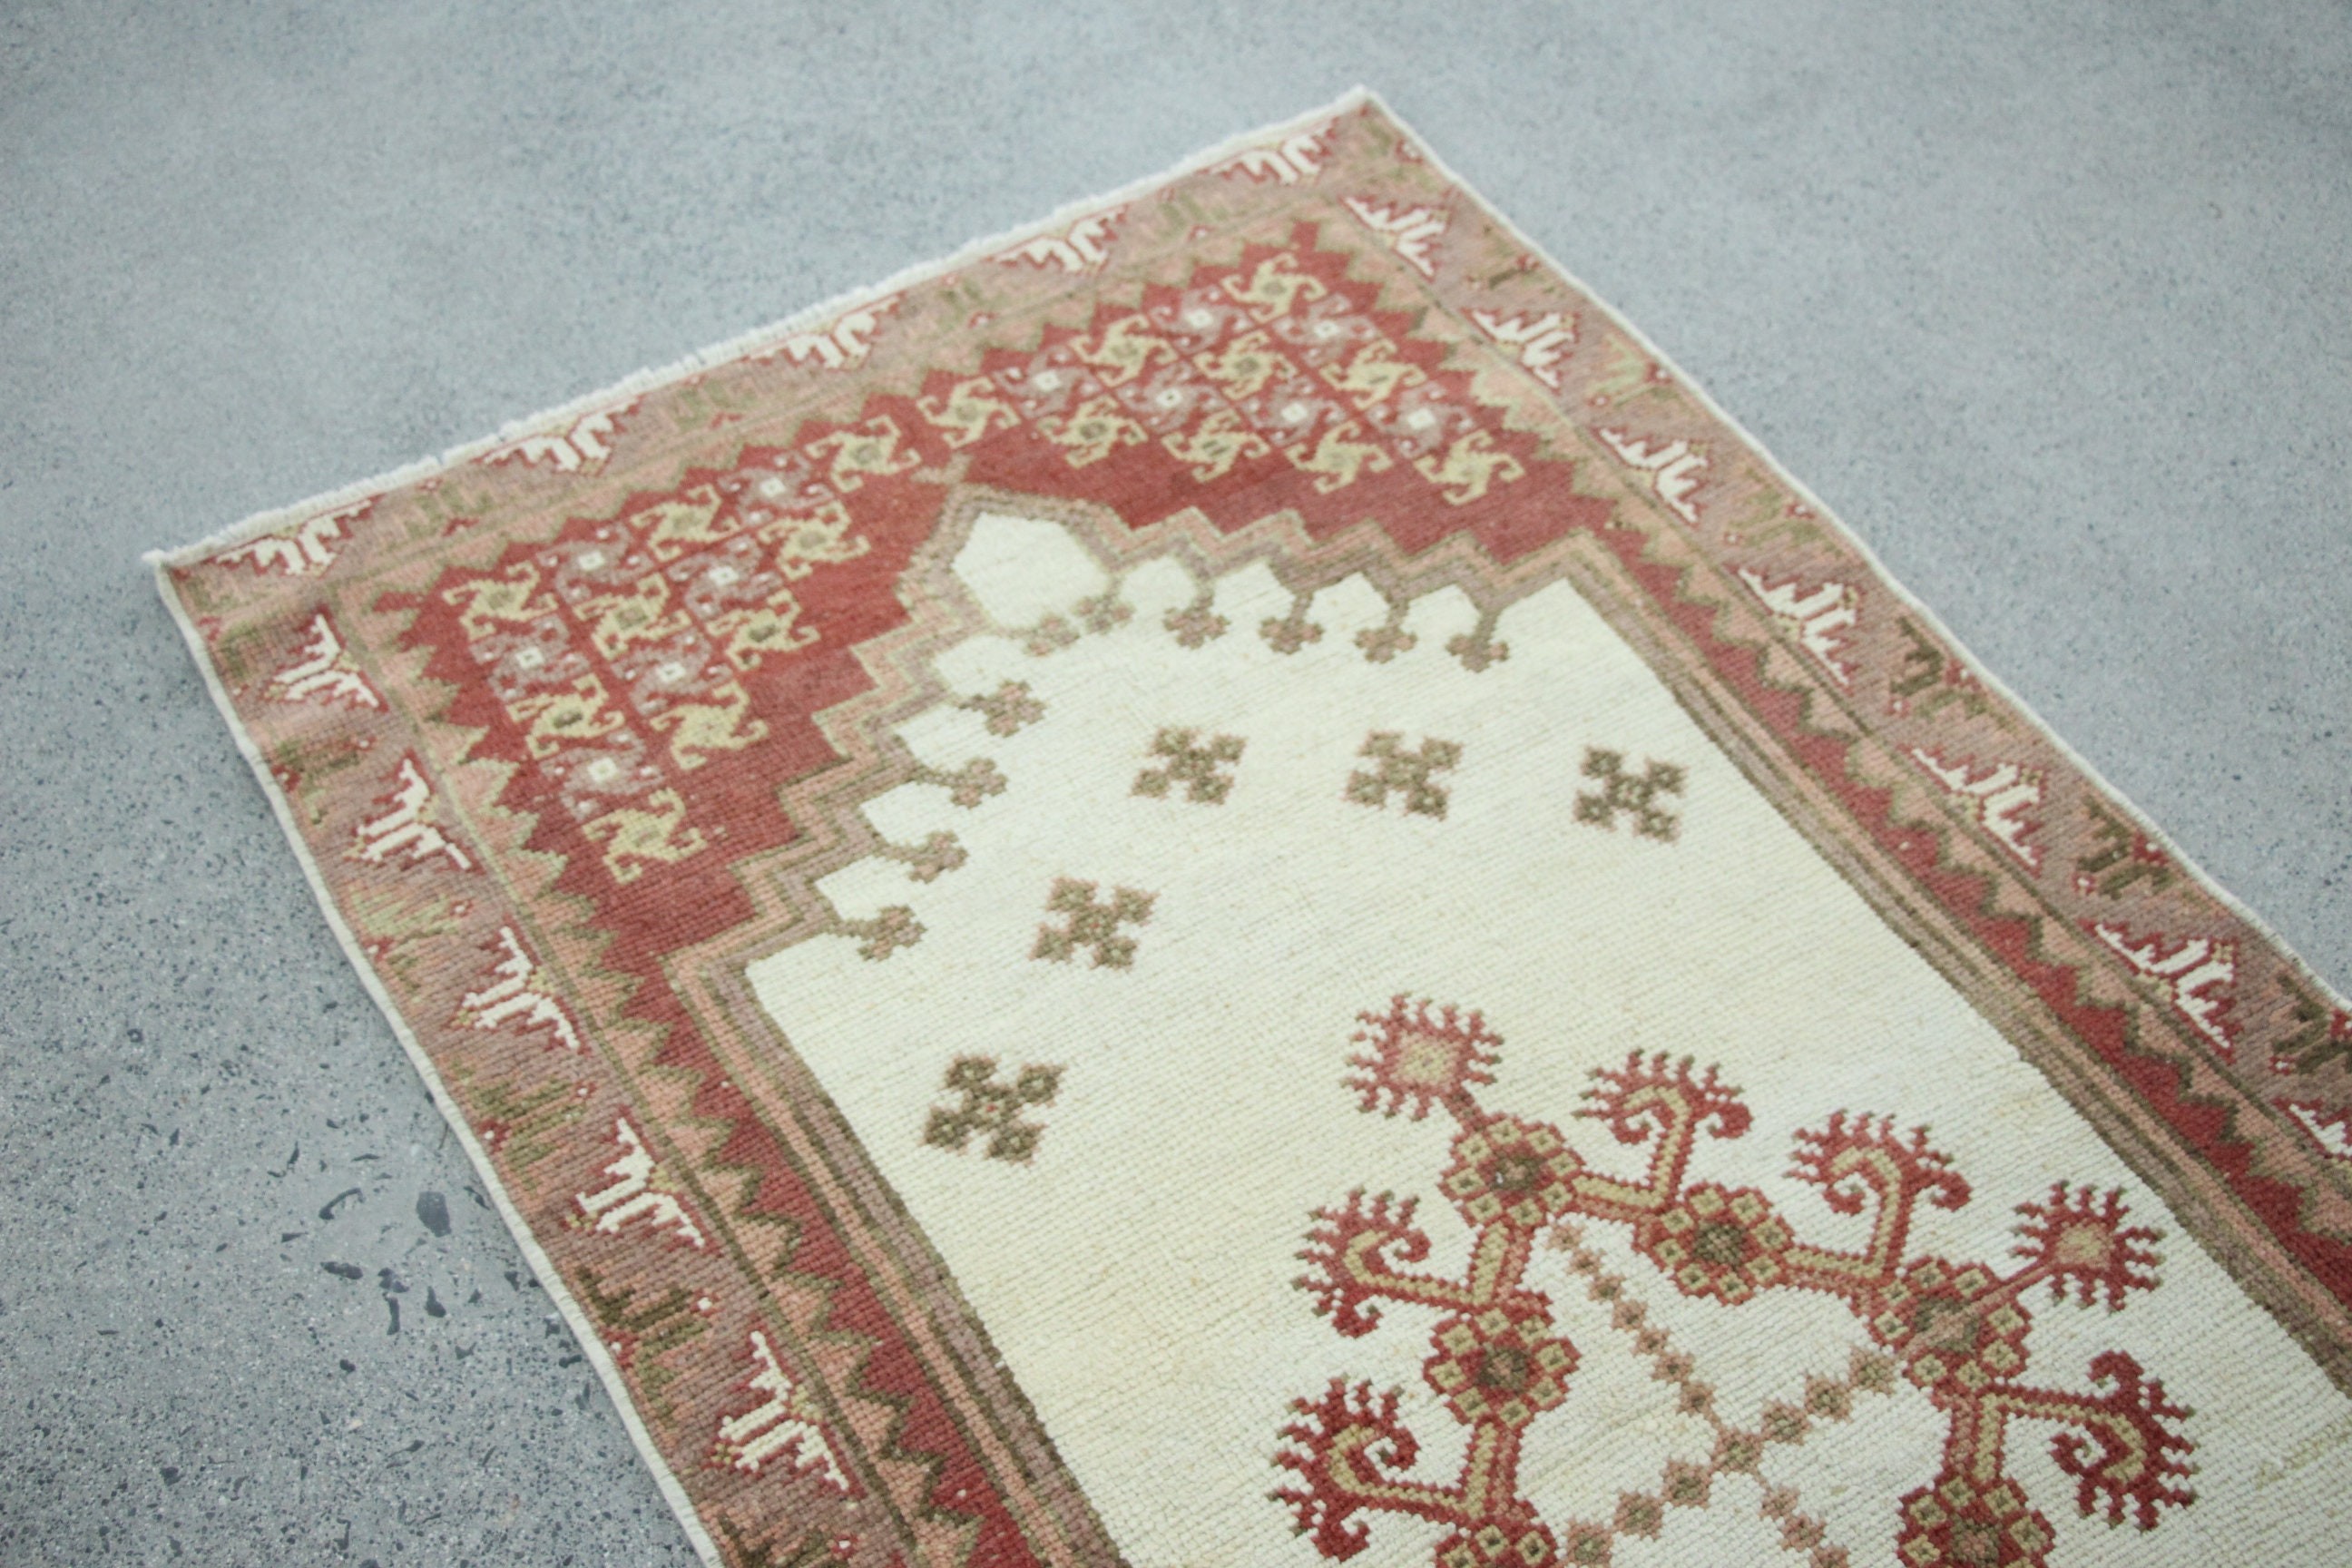 Cool Rug, Vintage Rug, Nursery Rug, Rugs for Bedroom, Entry Rugs, Turkish Rug, Home Decor Rug, White  2.9x6 ft Accent Rugs